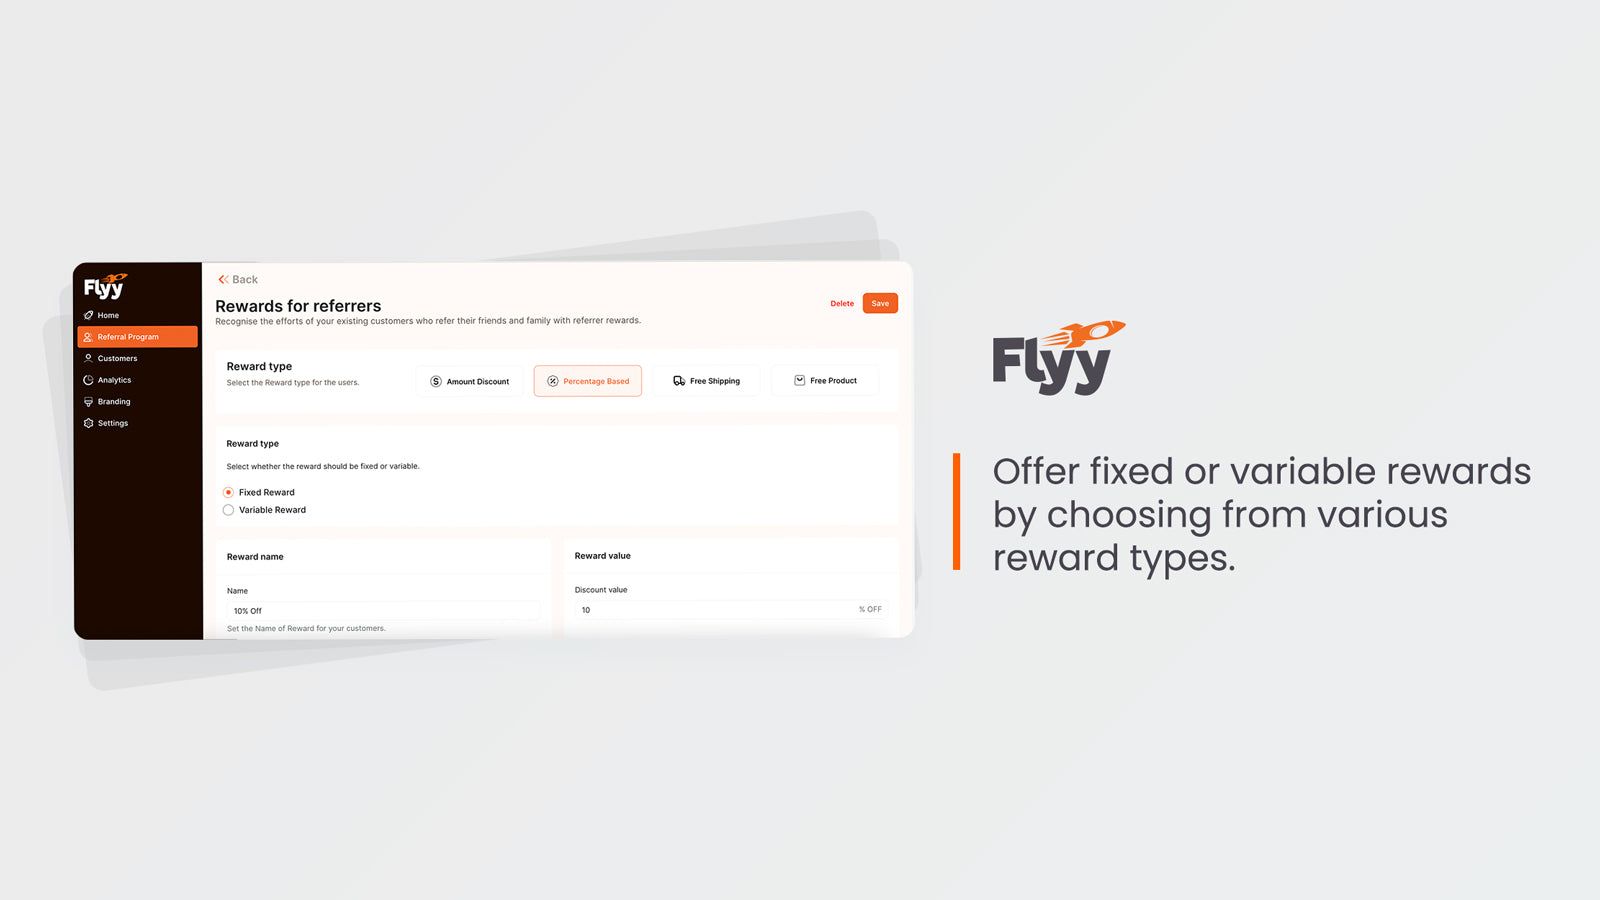 Set up various reward types for both referrer and referee.